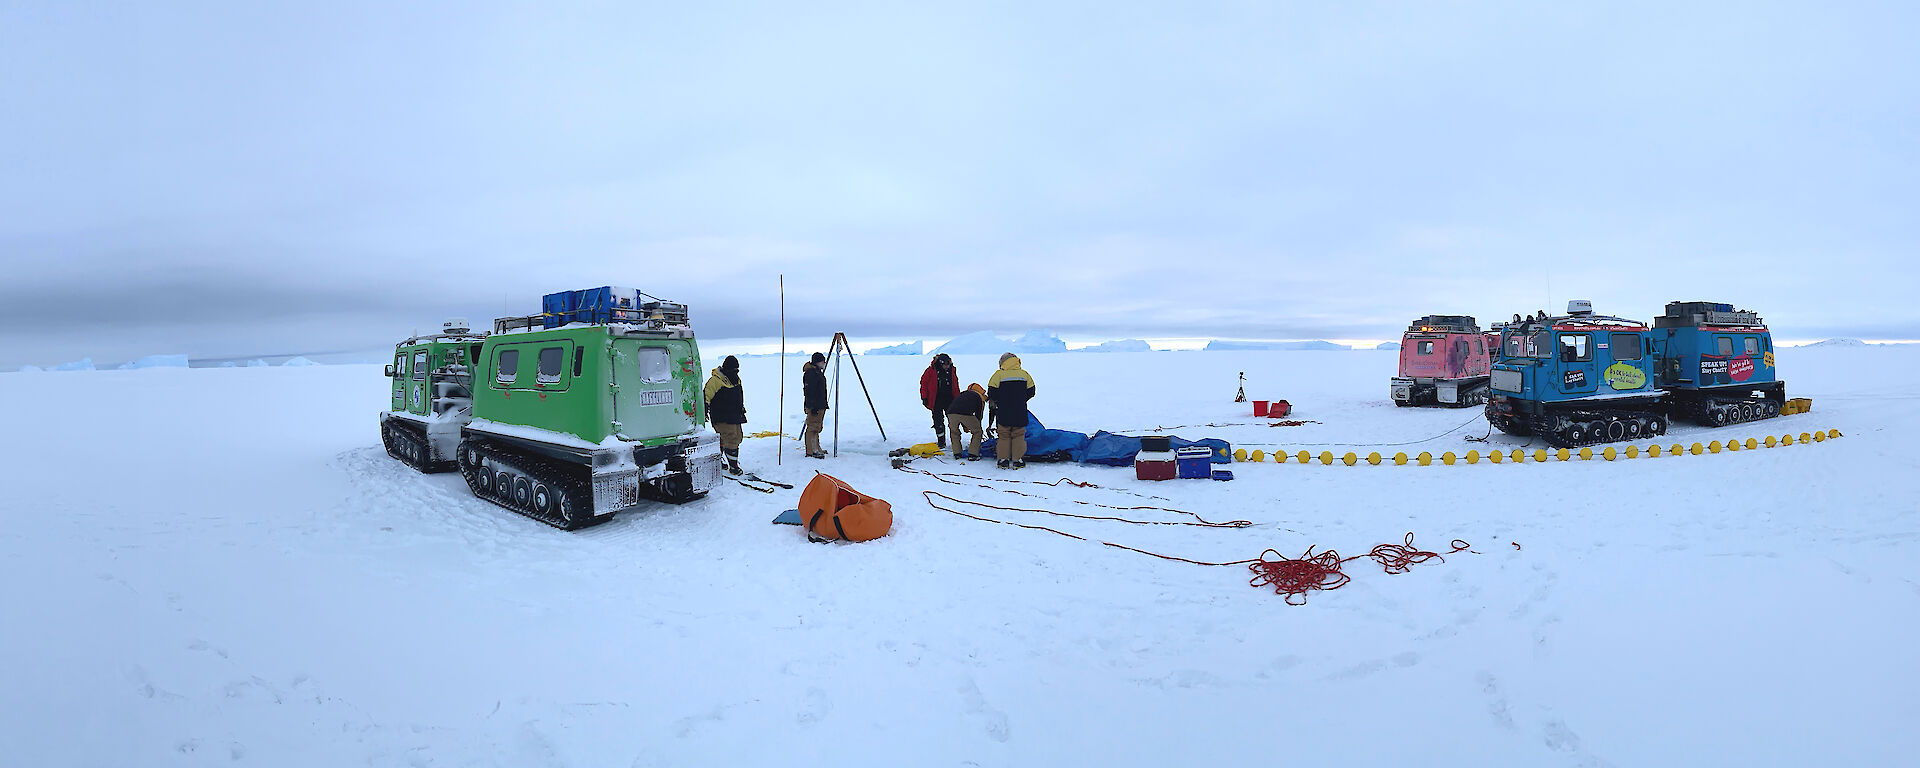 Two hagglunds and scientists gathered on sea ice, with scientific instruments.